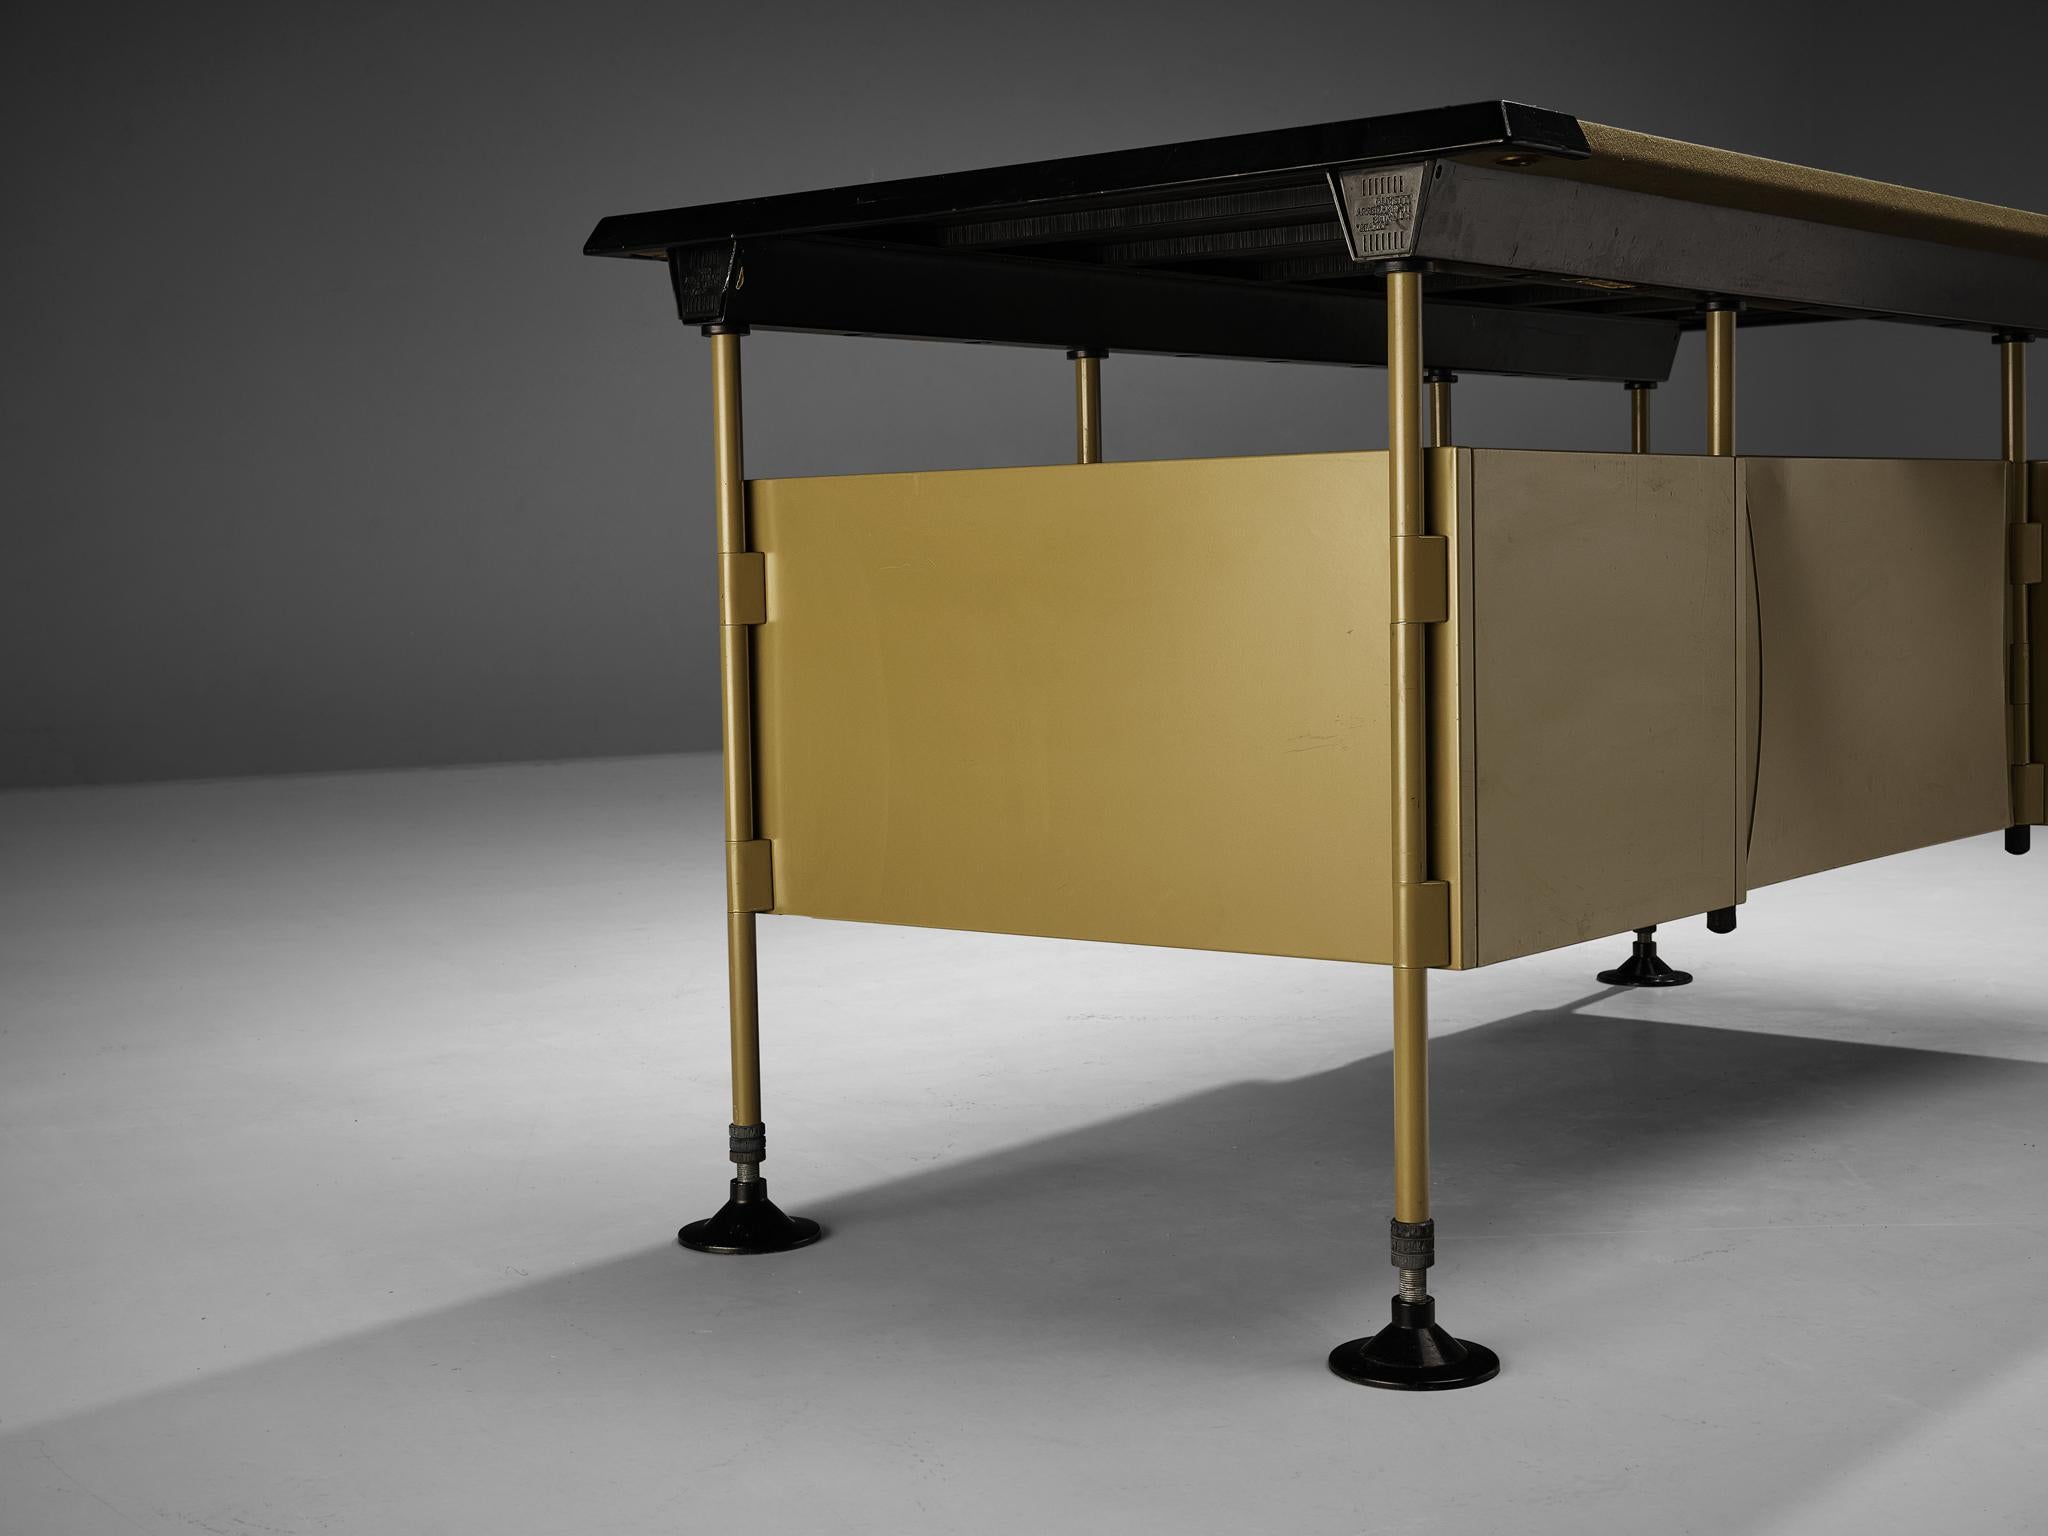 Steel Studio BBPR for Olivetti 'Spazio' Set with Desk, Sideboard and Table  For Sale